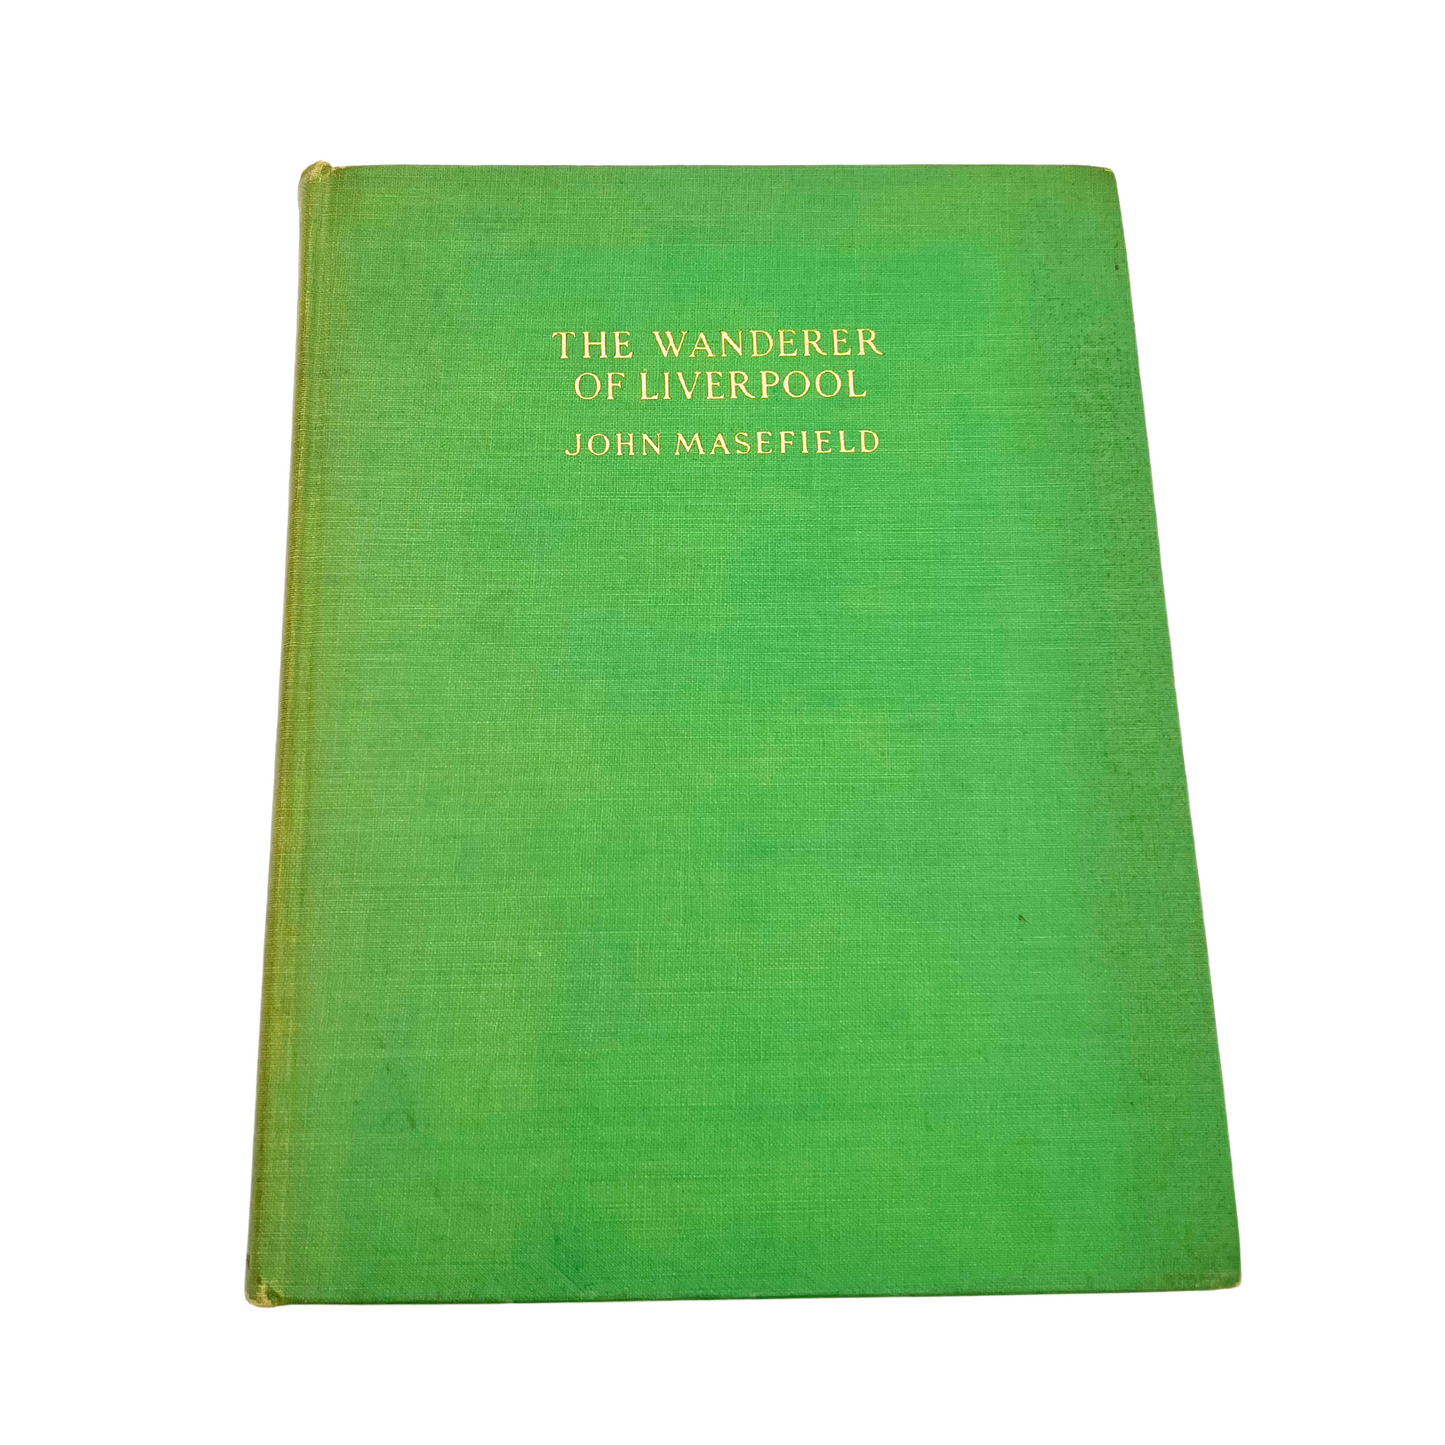 1930 book: The Wanderer of Liverpool